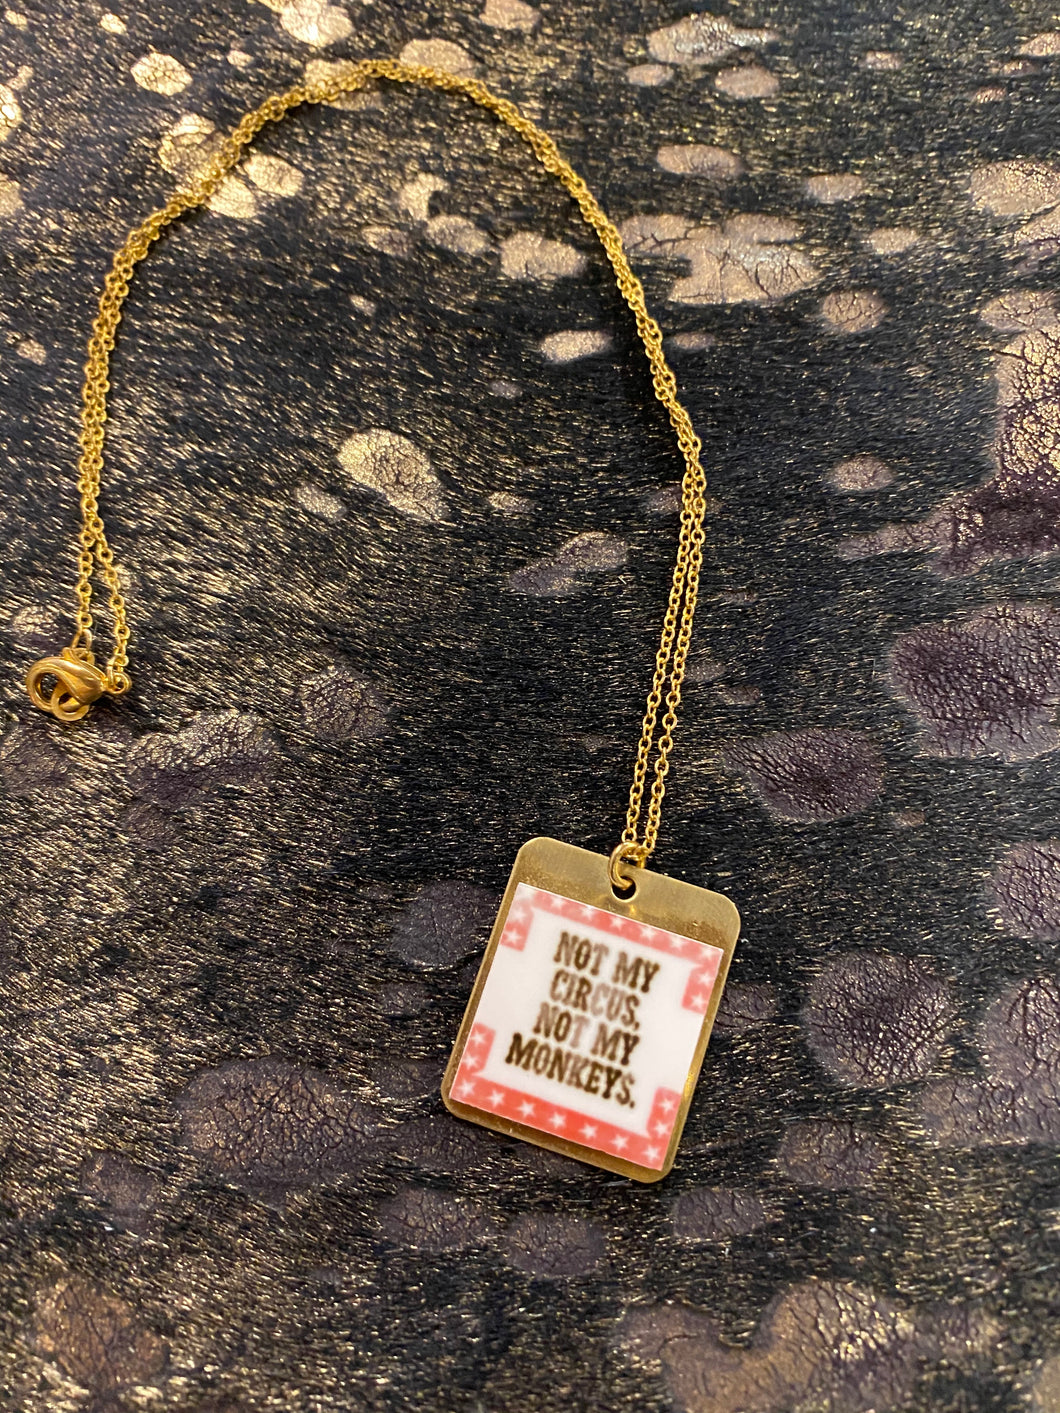 “Not My Circus” Necklace